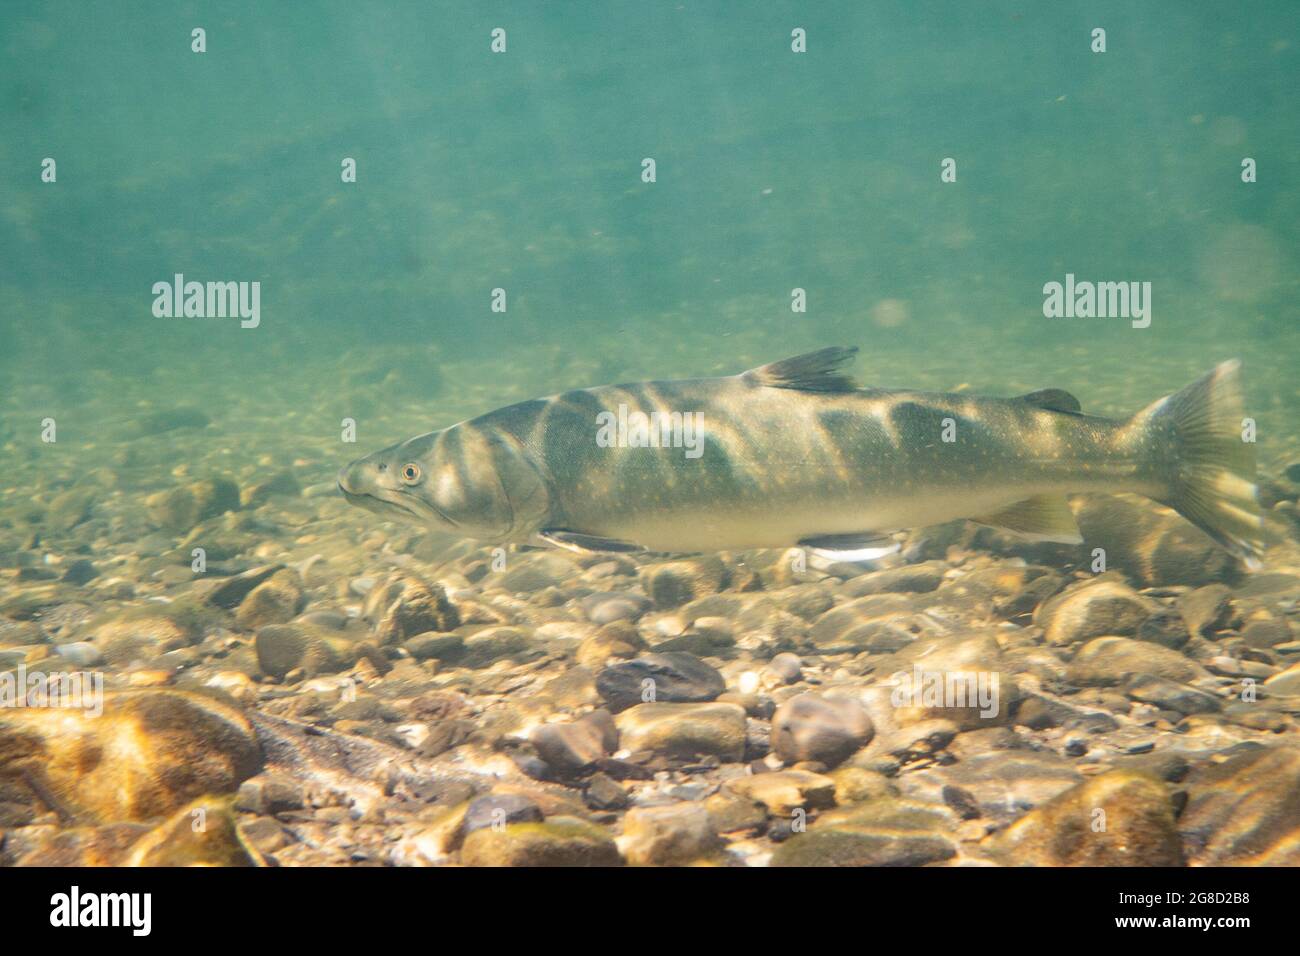 Adult Bull Trout in the Pine River, British Columbia, Canada. Stock Photo